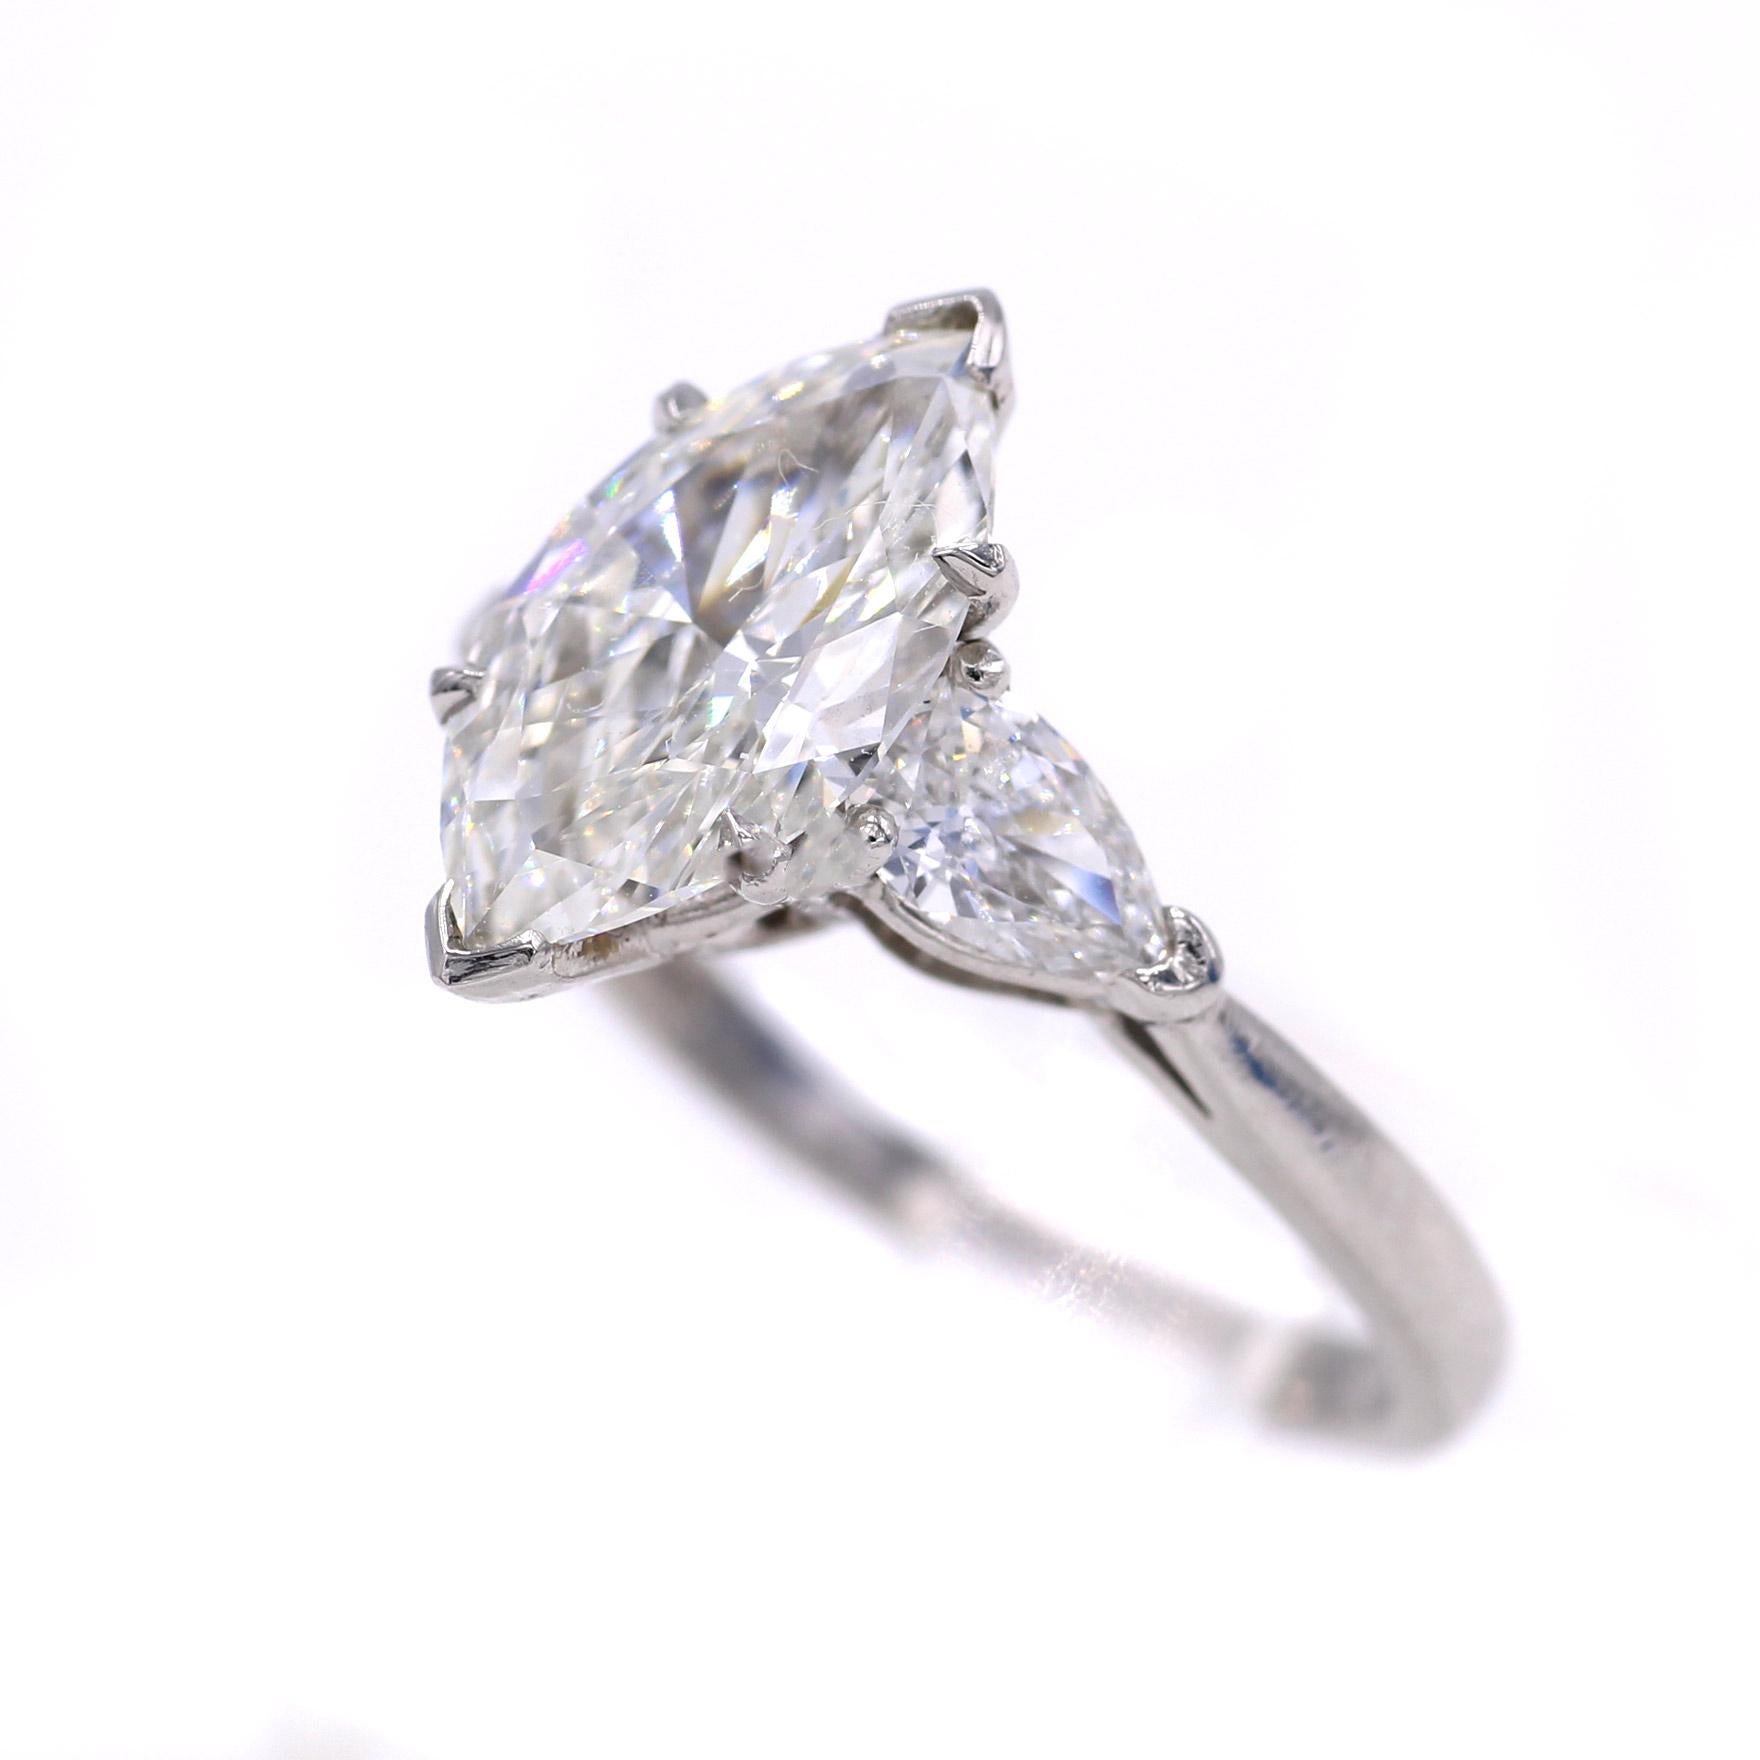 Beautiful, lively and brilliant 1.98 carat marquis cut diamonds, set in a handcrafted platinum mounting embellished by 2 perfectly matched bright white pear shape diamonds. Weighing only 2 points less than 2 carats the diamond looks larger than most